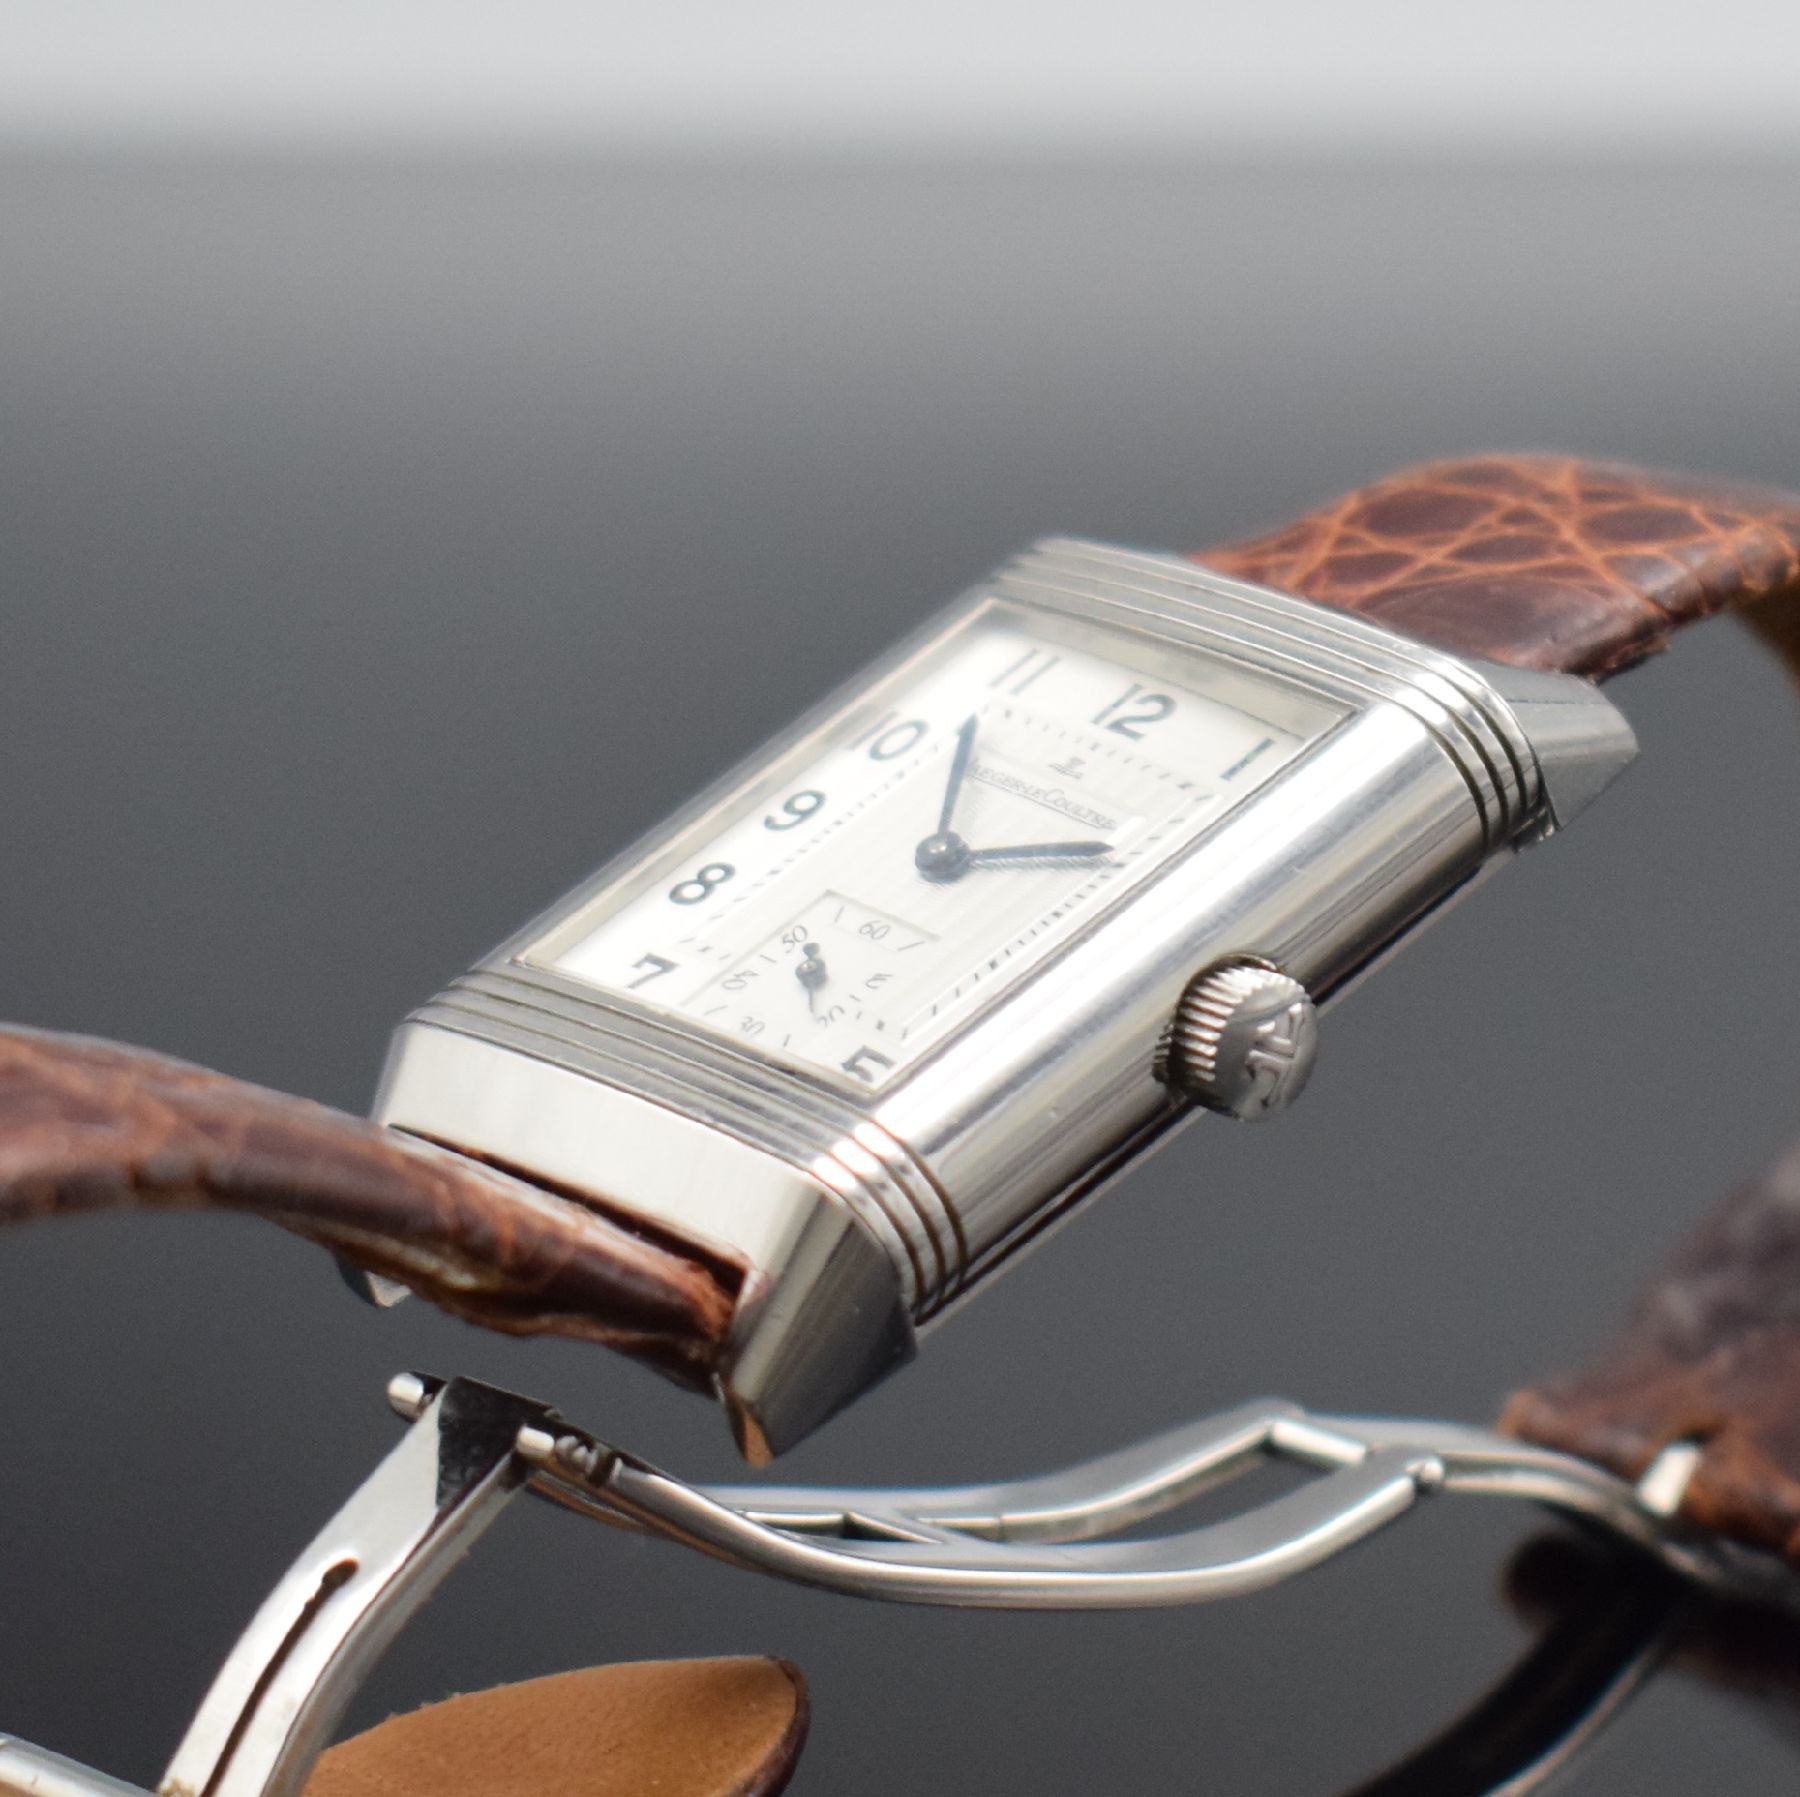 Jaeger-LeCoultre Reverso Grand Taille Armbanduhr in Stahl, - Image 9 of 11